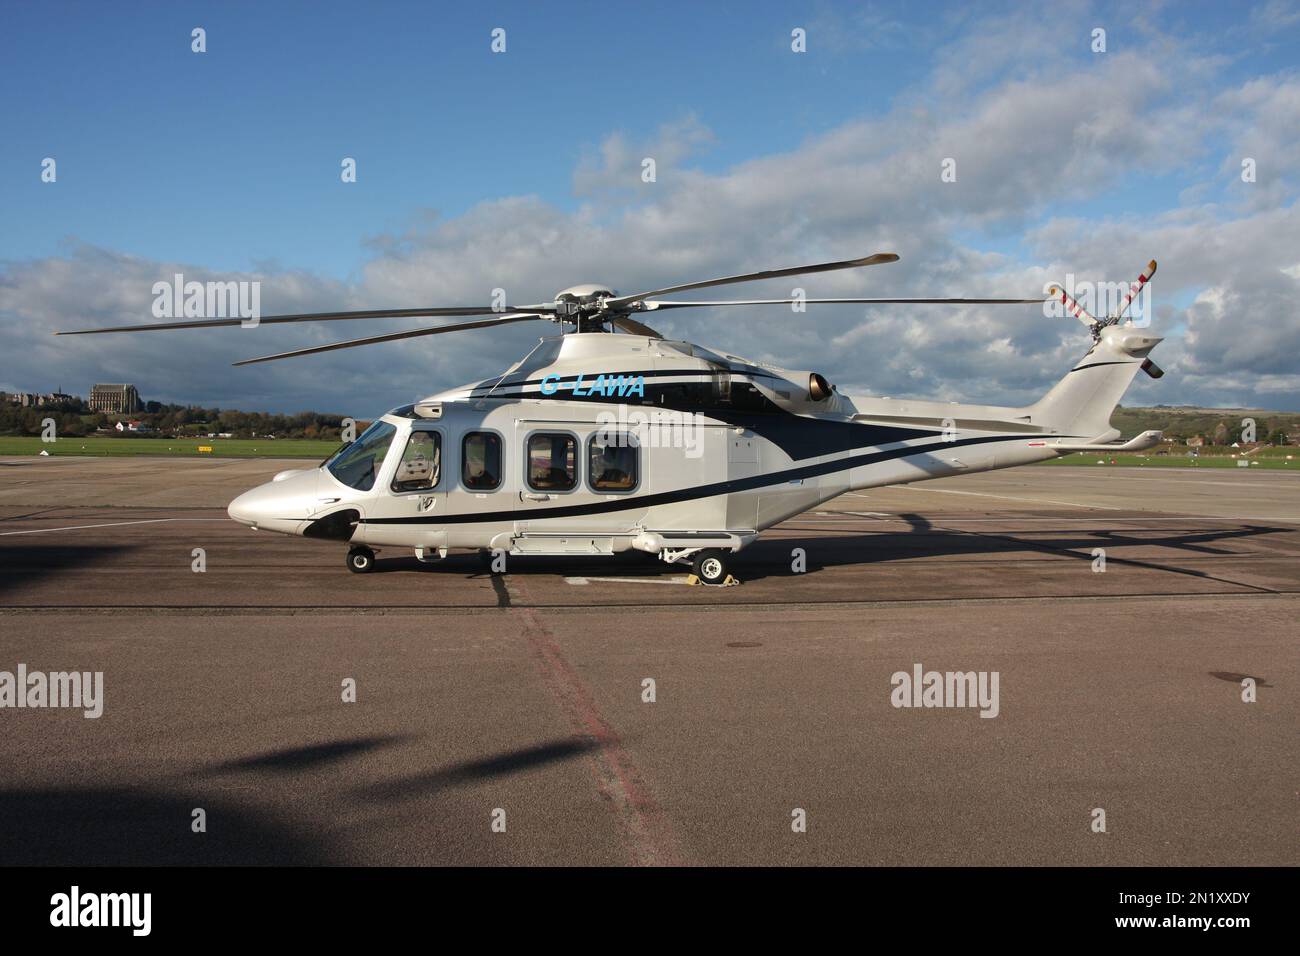 An Agusta-Westland AW-139 helicopter on the ramp at Brighton City Airport England Stock Photo